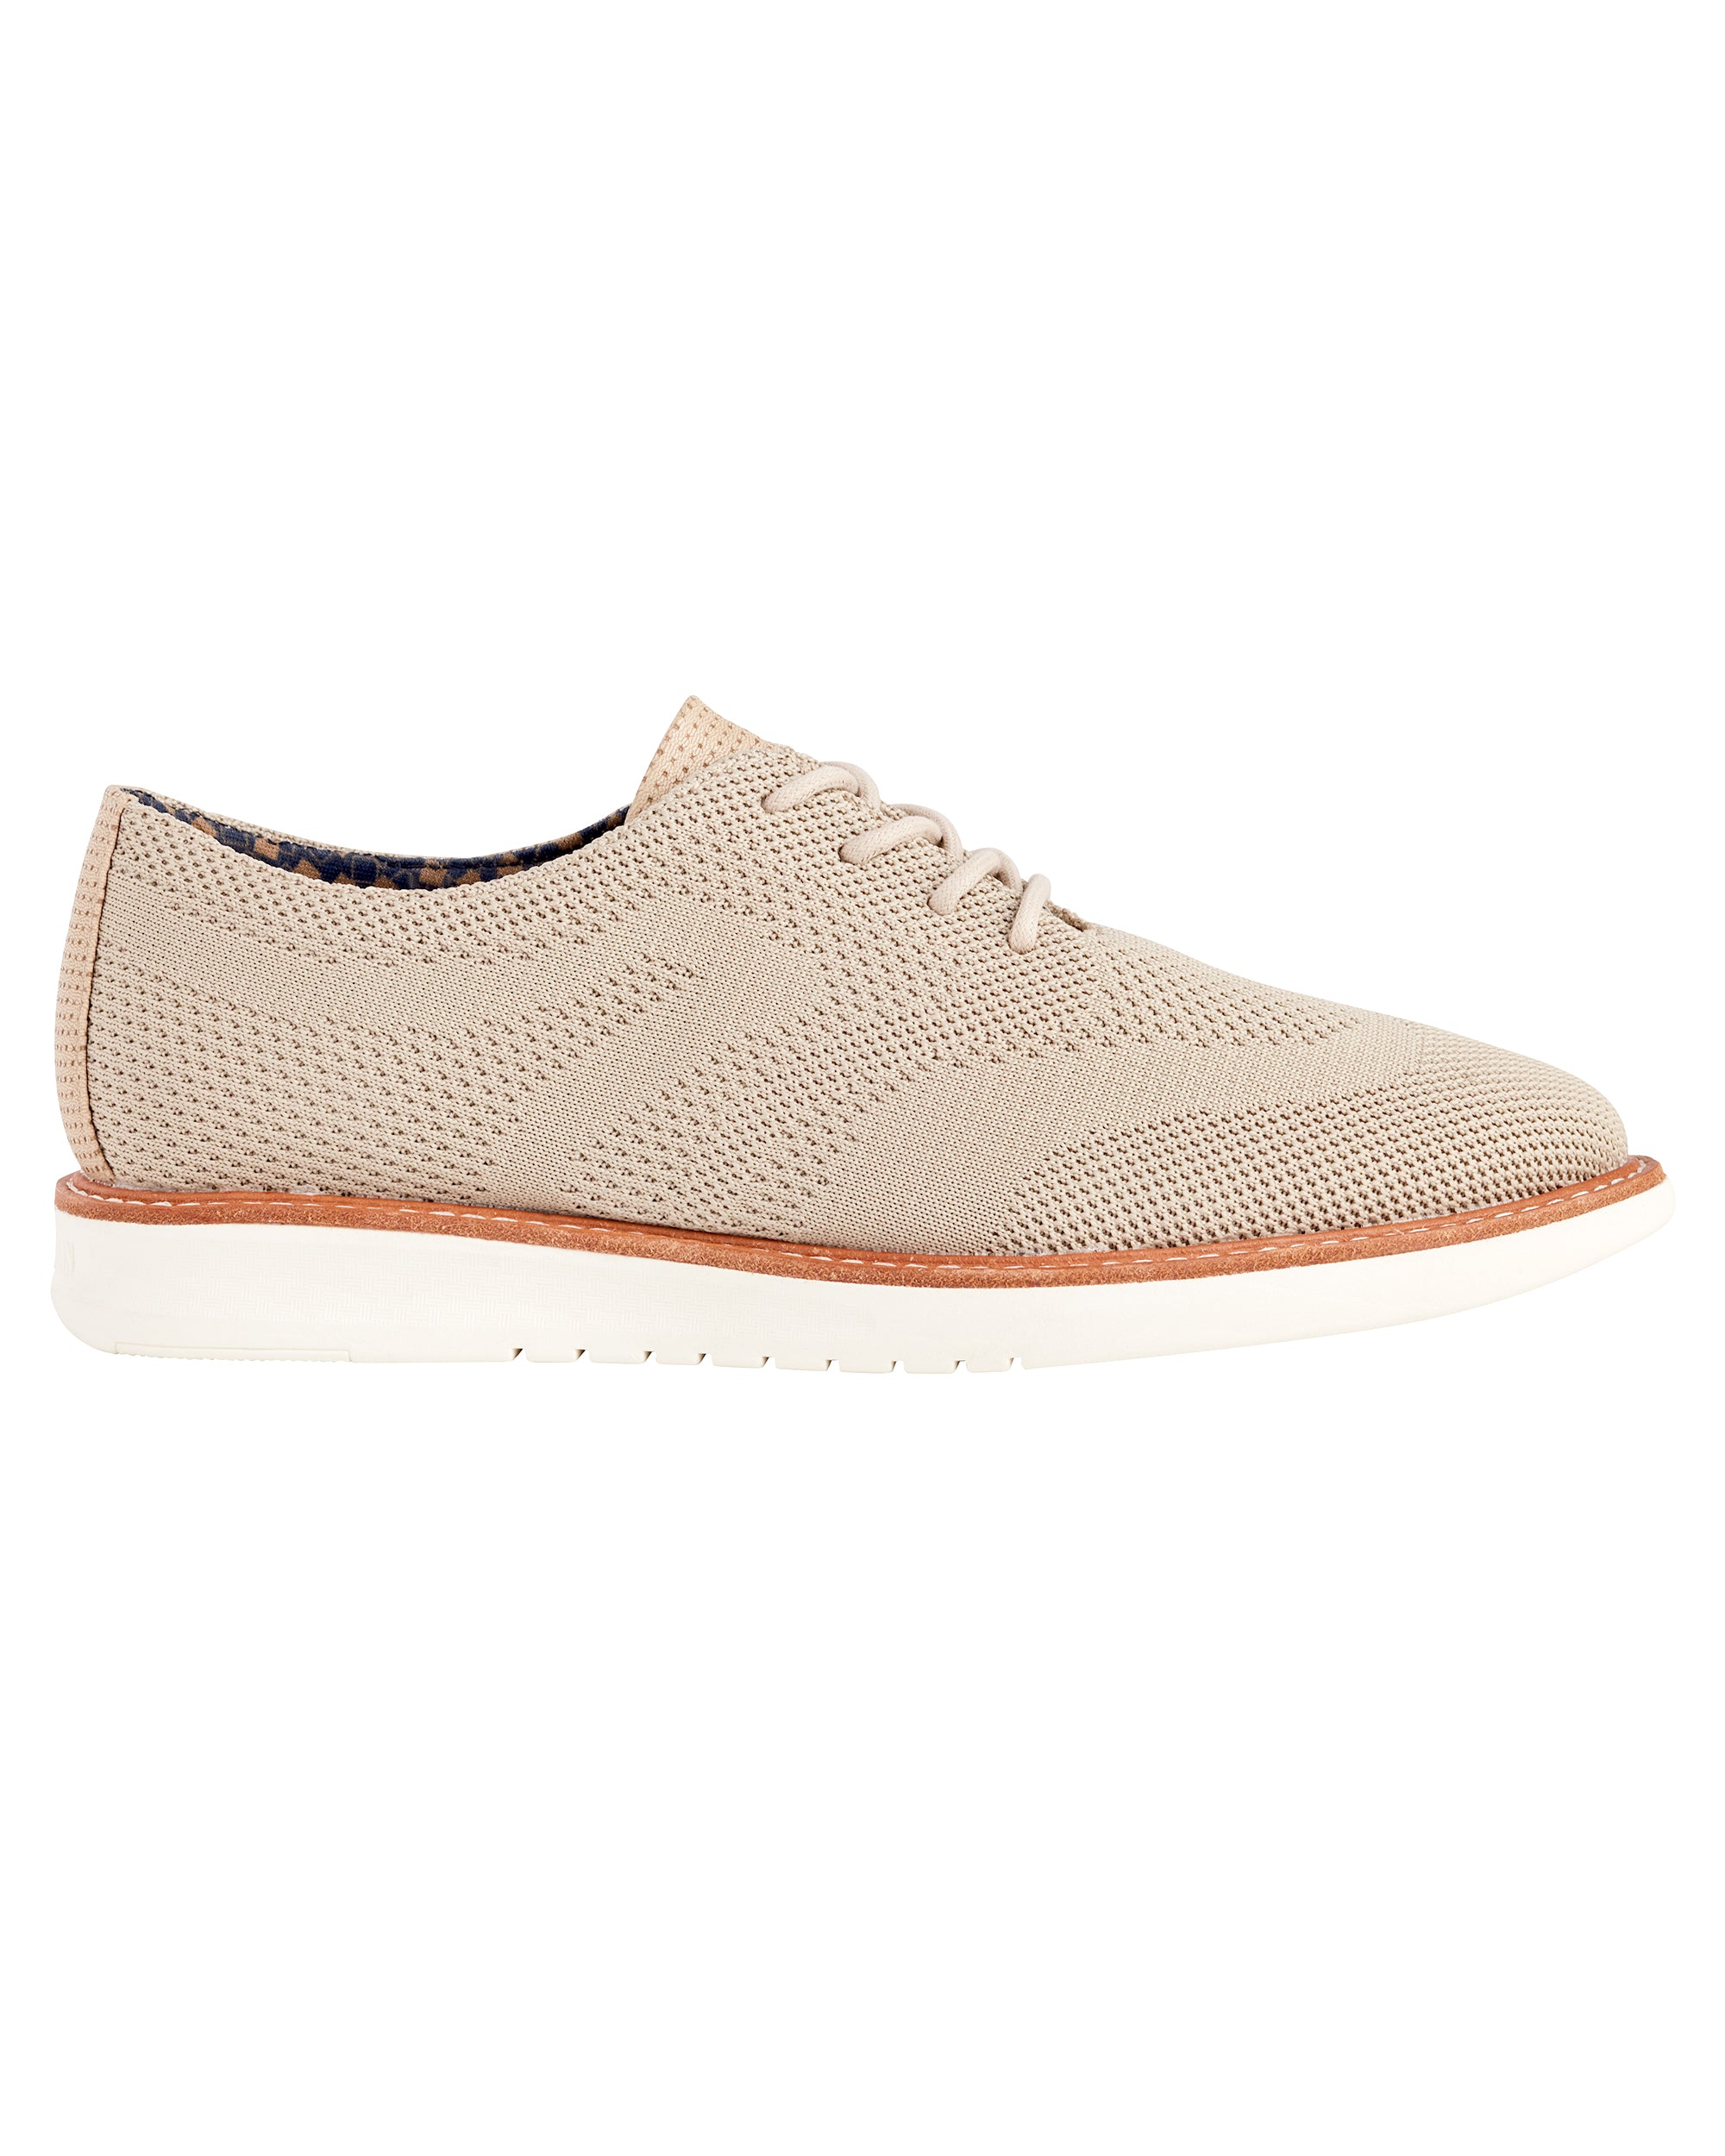 Nu Flyknit Casual Wingtip Shoe - Taupe 